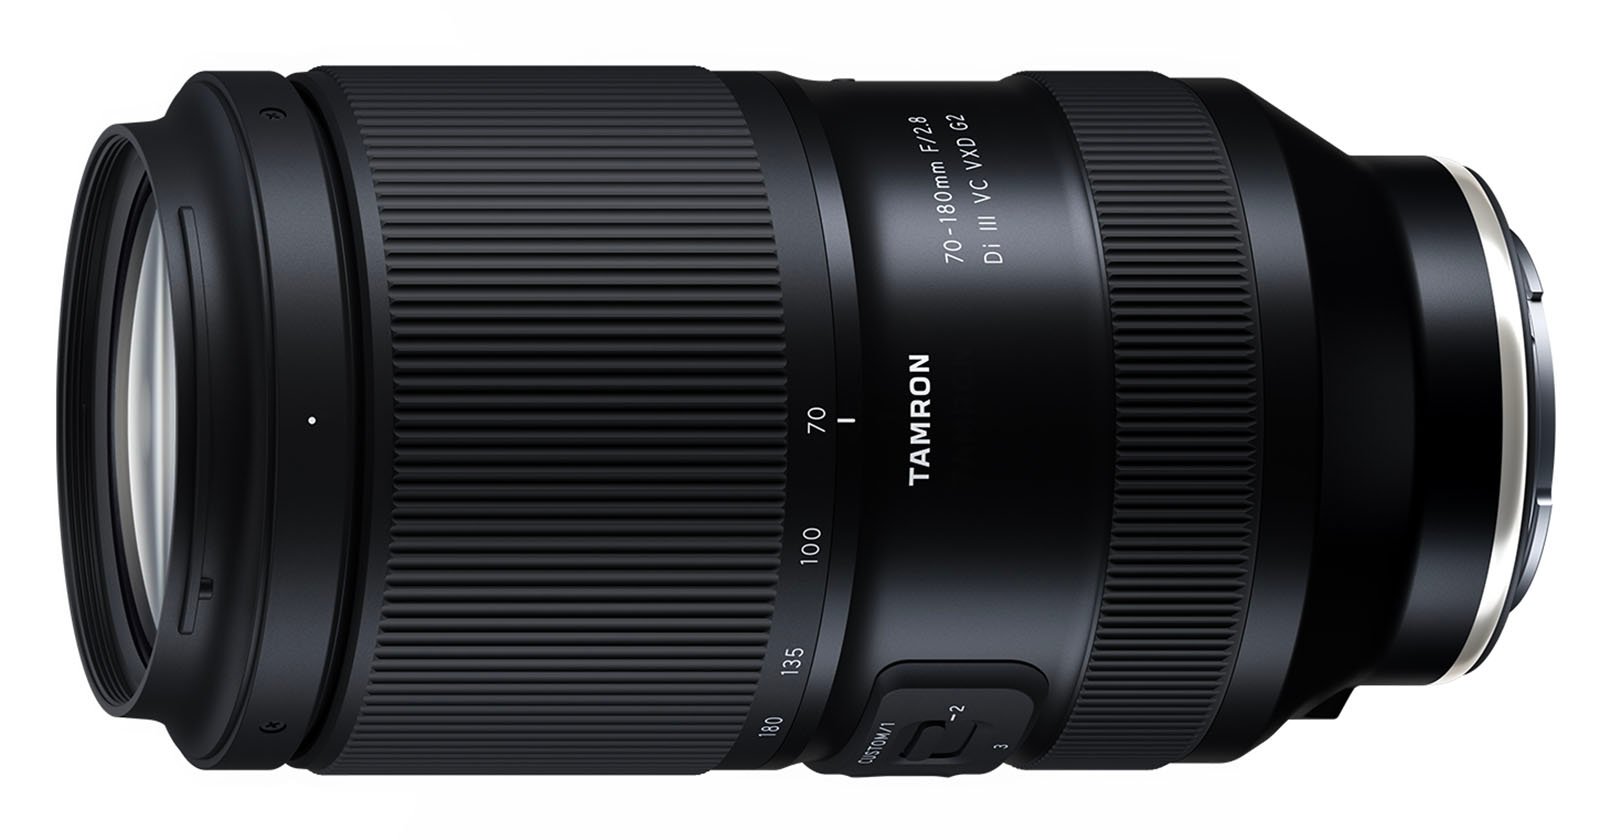 Upgraded Tamron 70-180mm f/2.8 G2 Lens Launches Next Month